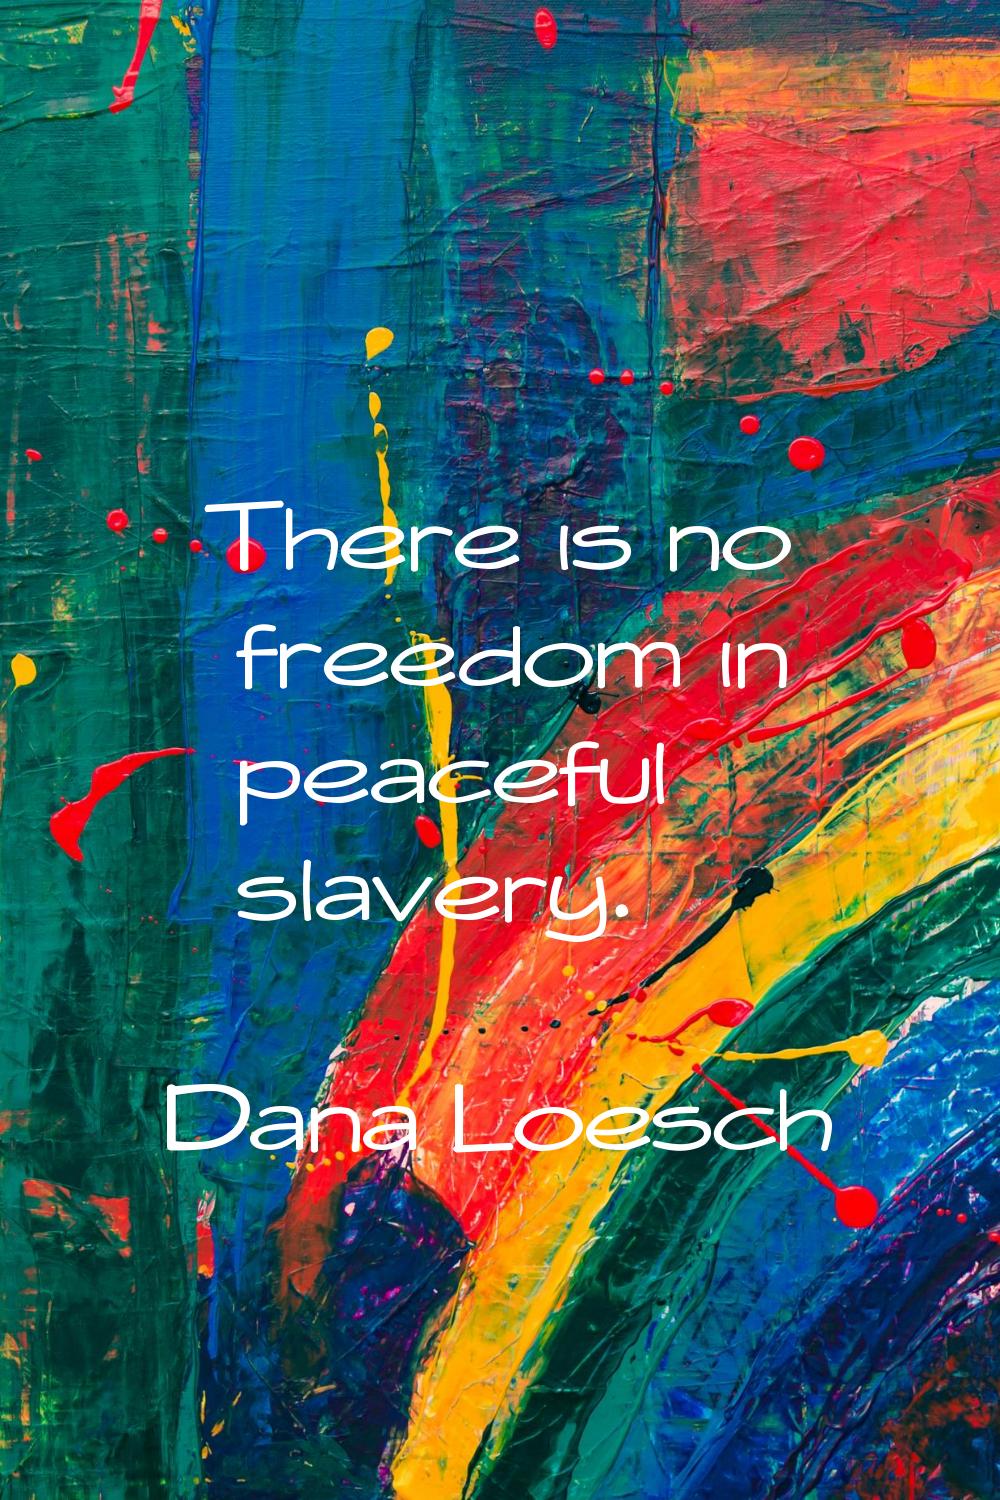 There is no freedom in peaceful slavery.